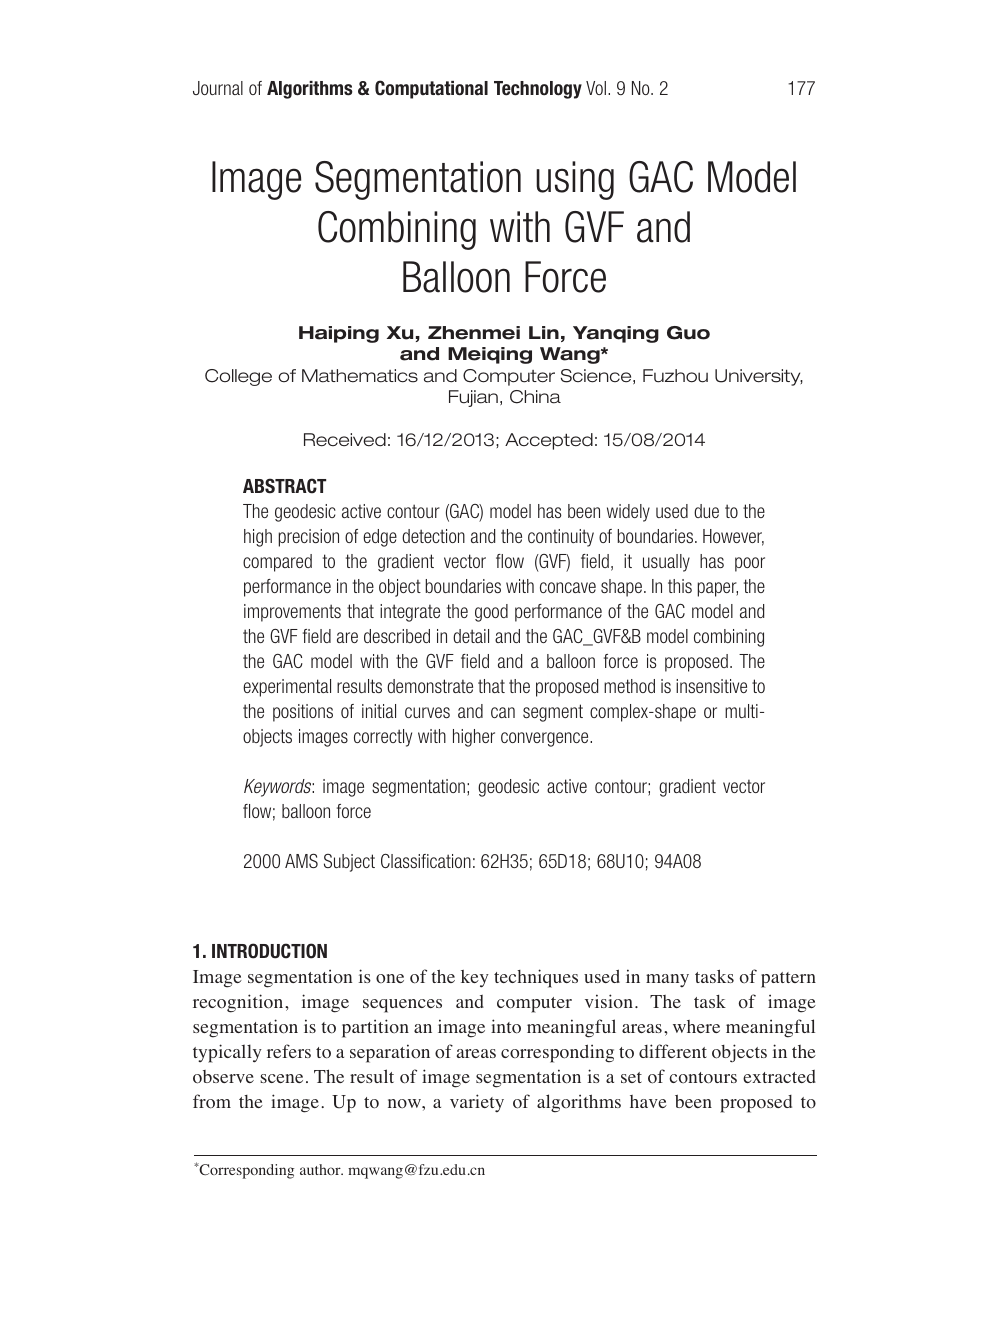 Image Segmentation Using Gac Model Combining With Gvf And Balloon Force Topic Of Research Paper In Medical Engineering Download Scholarly Article Pdf And Read For Free On Cyberleninka Open Science Hub